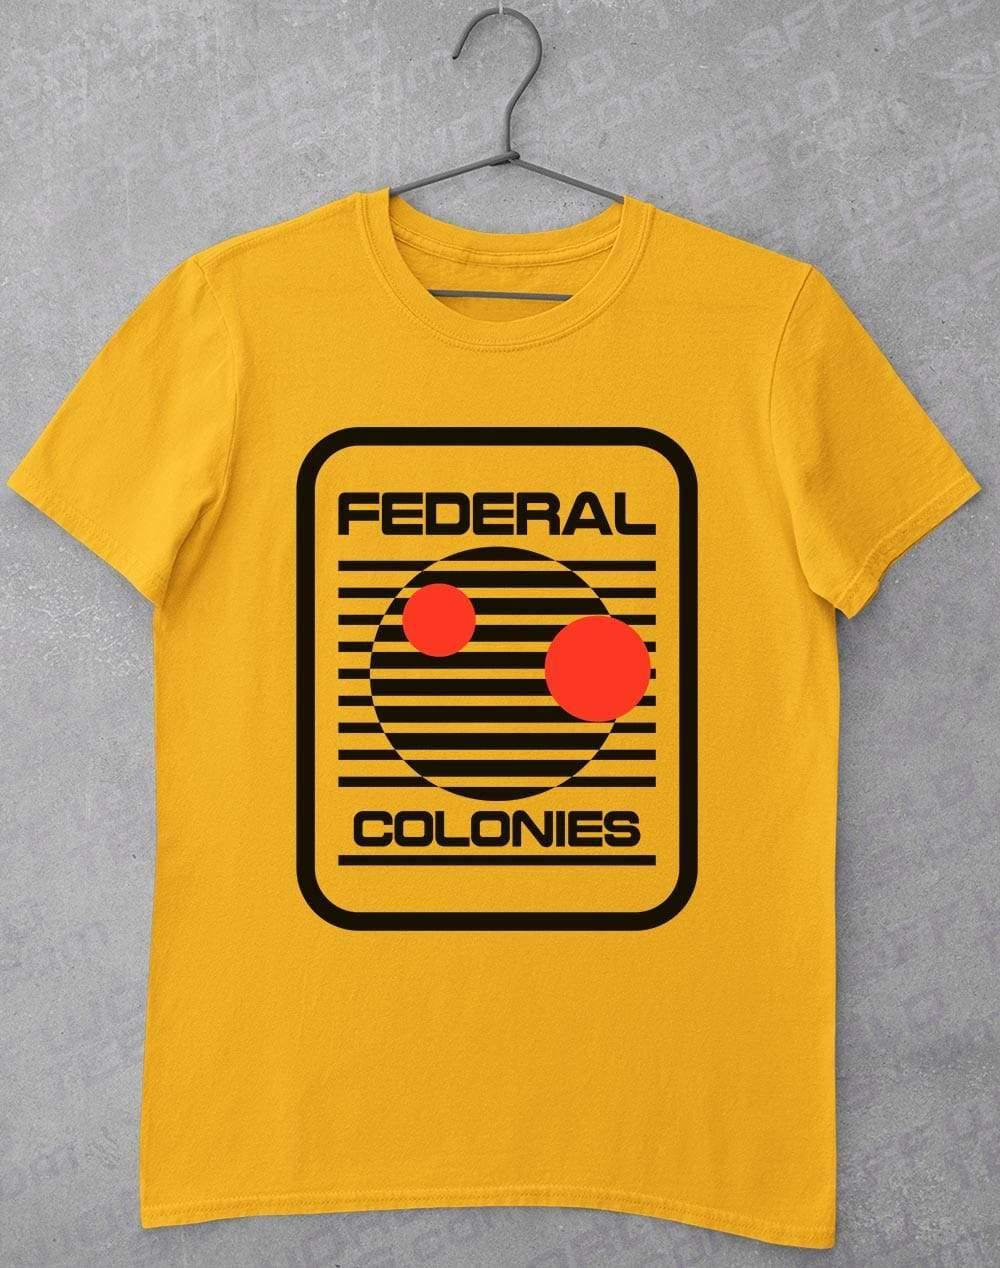 Federal Colonies T-Shirt S / Gold  - Off World Tees